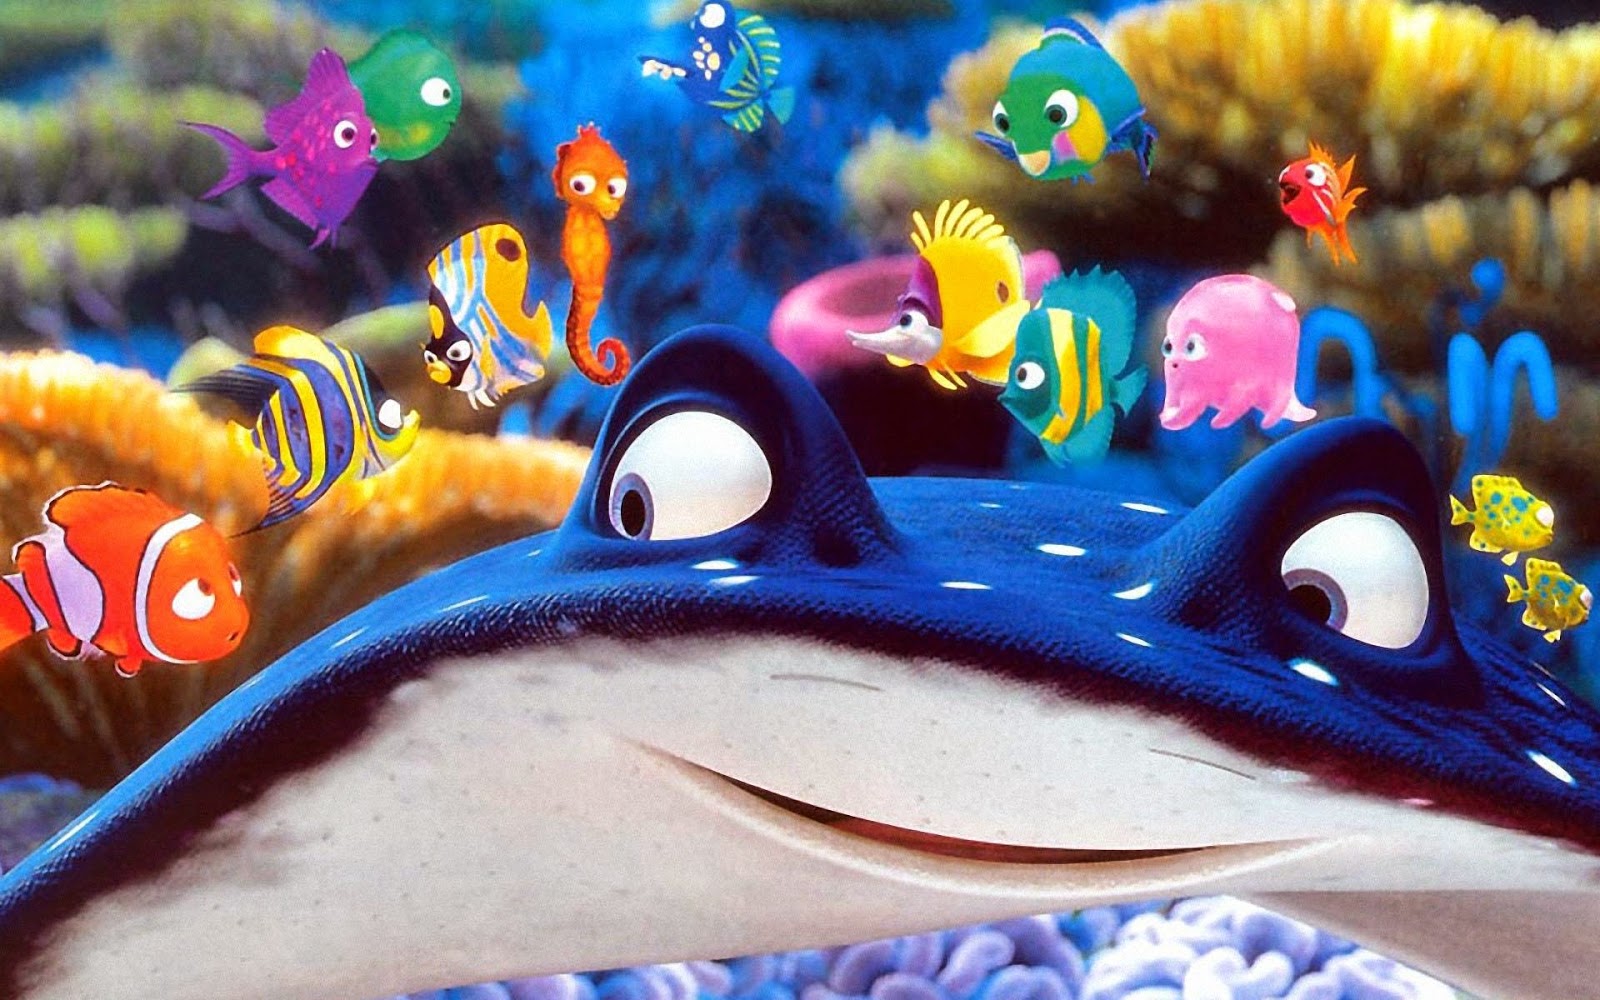 WALLPAPER ANDROID IPHONE Finding Nemo Wallpaper